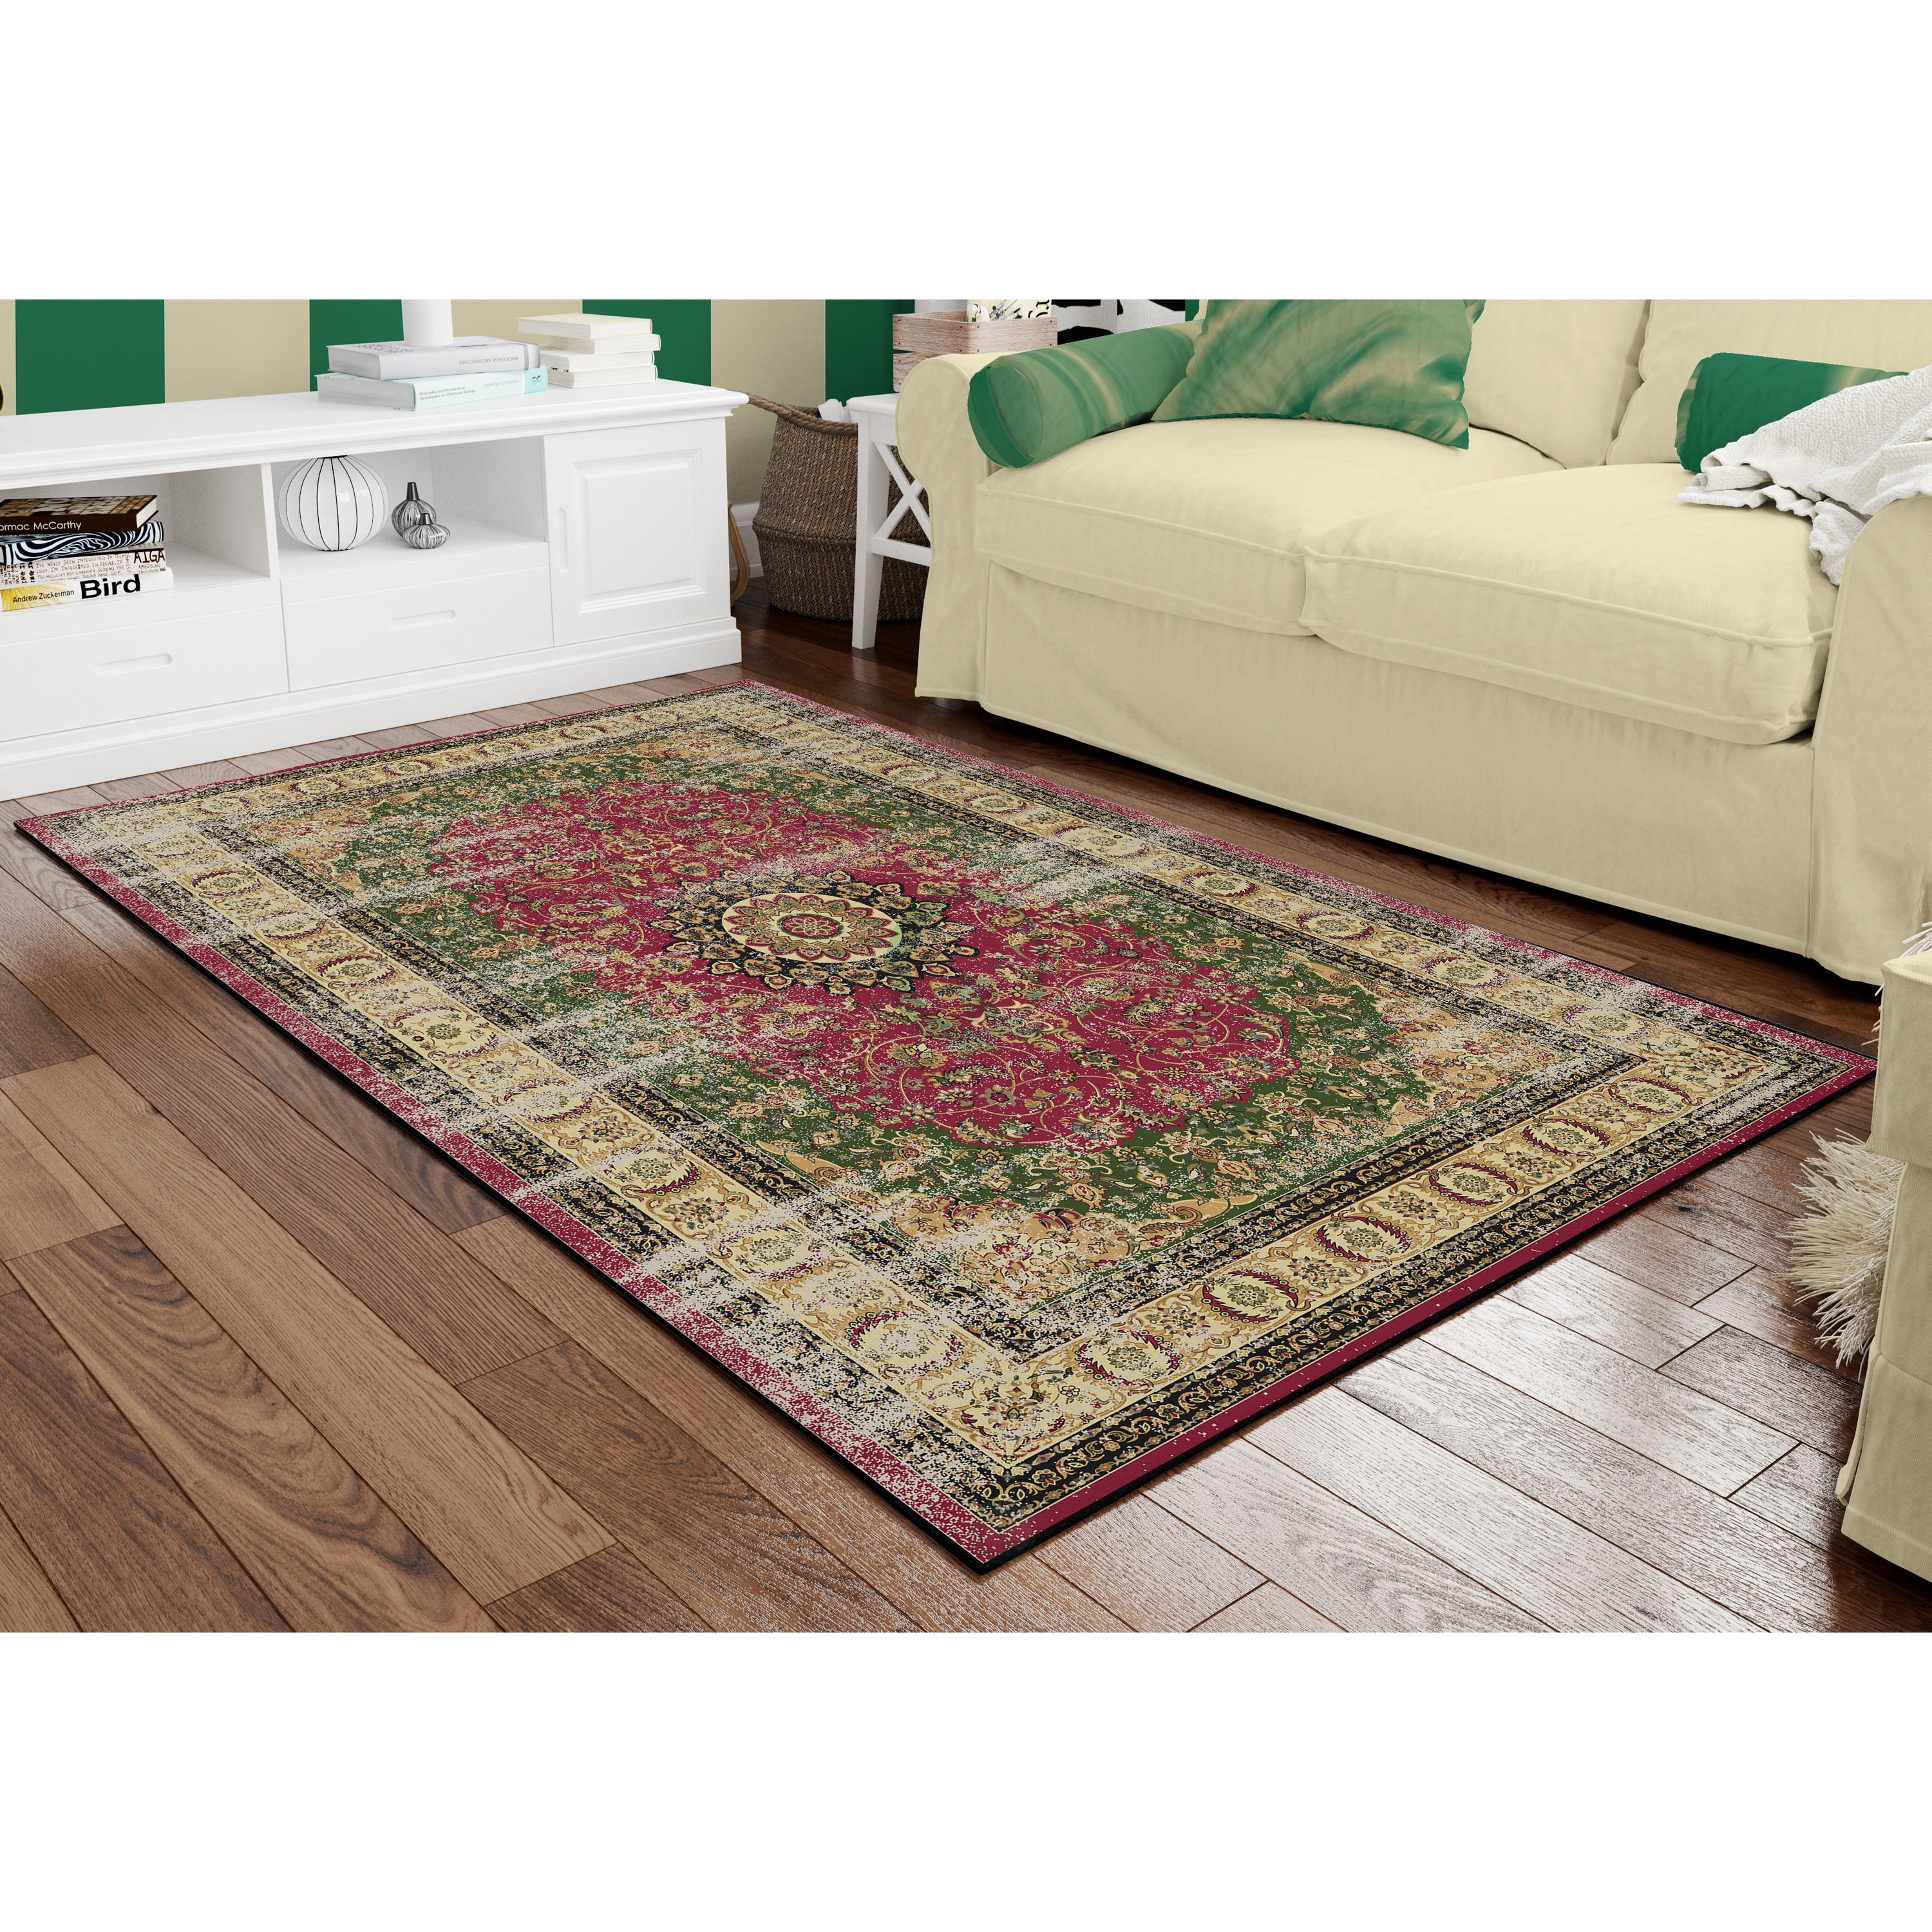 Deerlux Traditional Oriental Persian Style Living Room Area Rug With Nonslip Backing, Classic Pink - 5x7